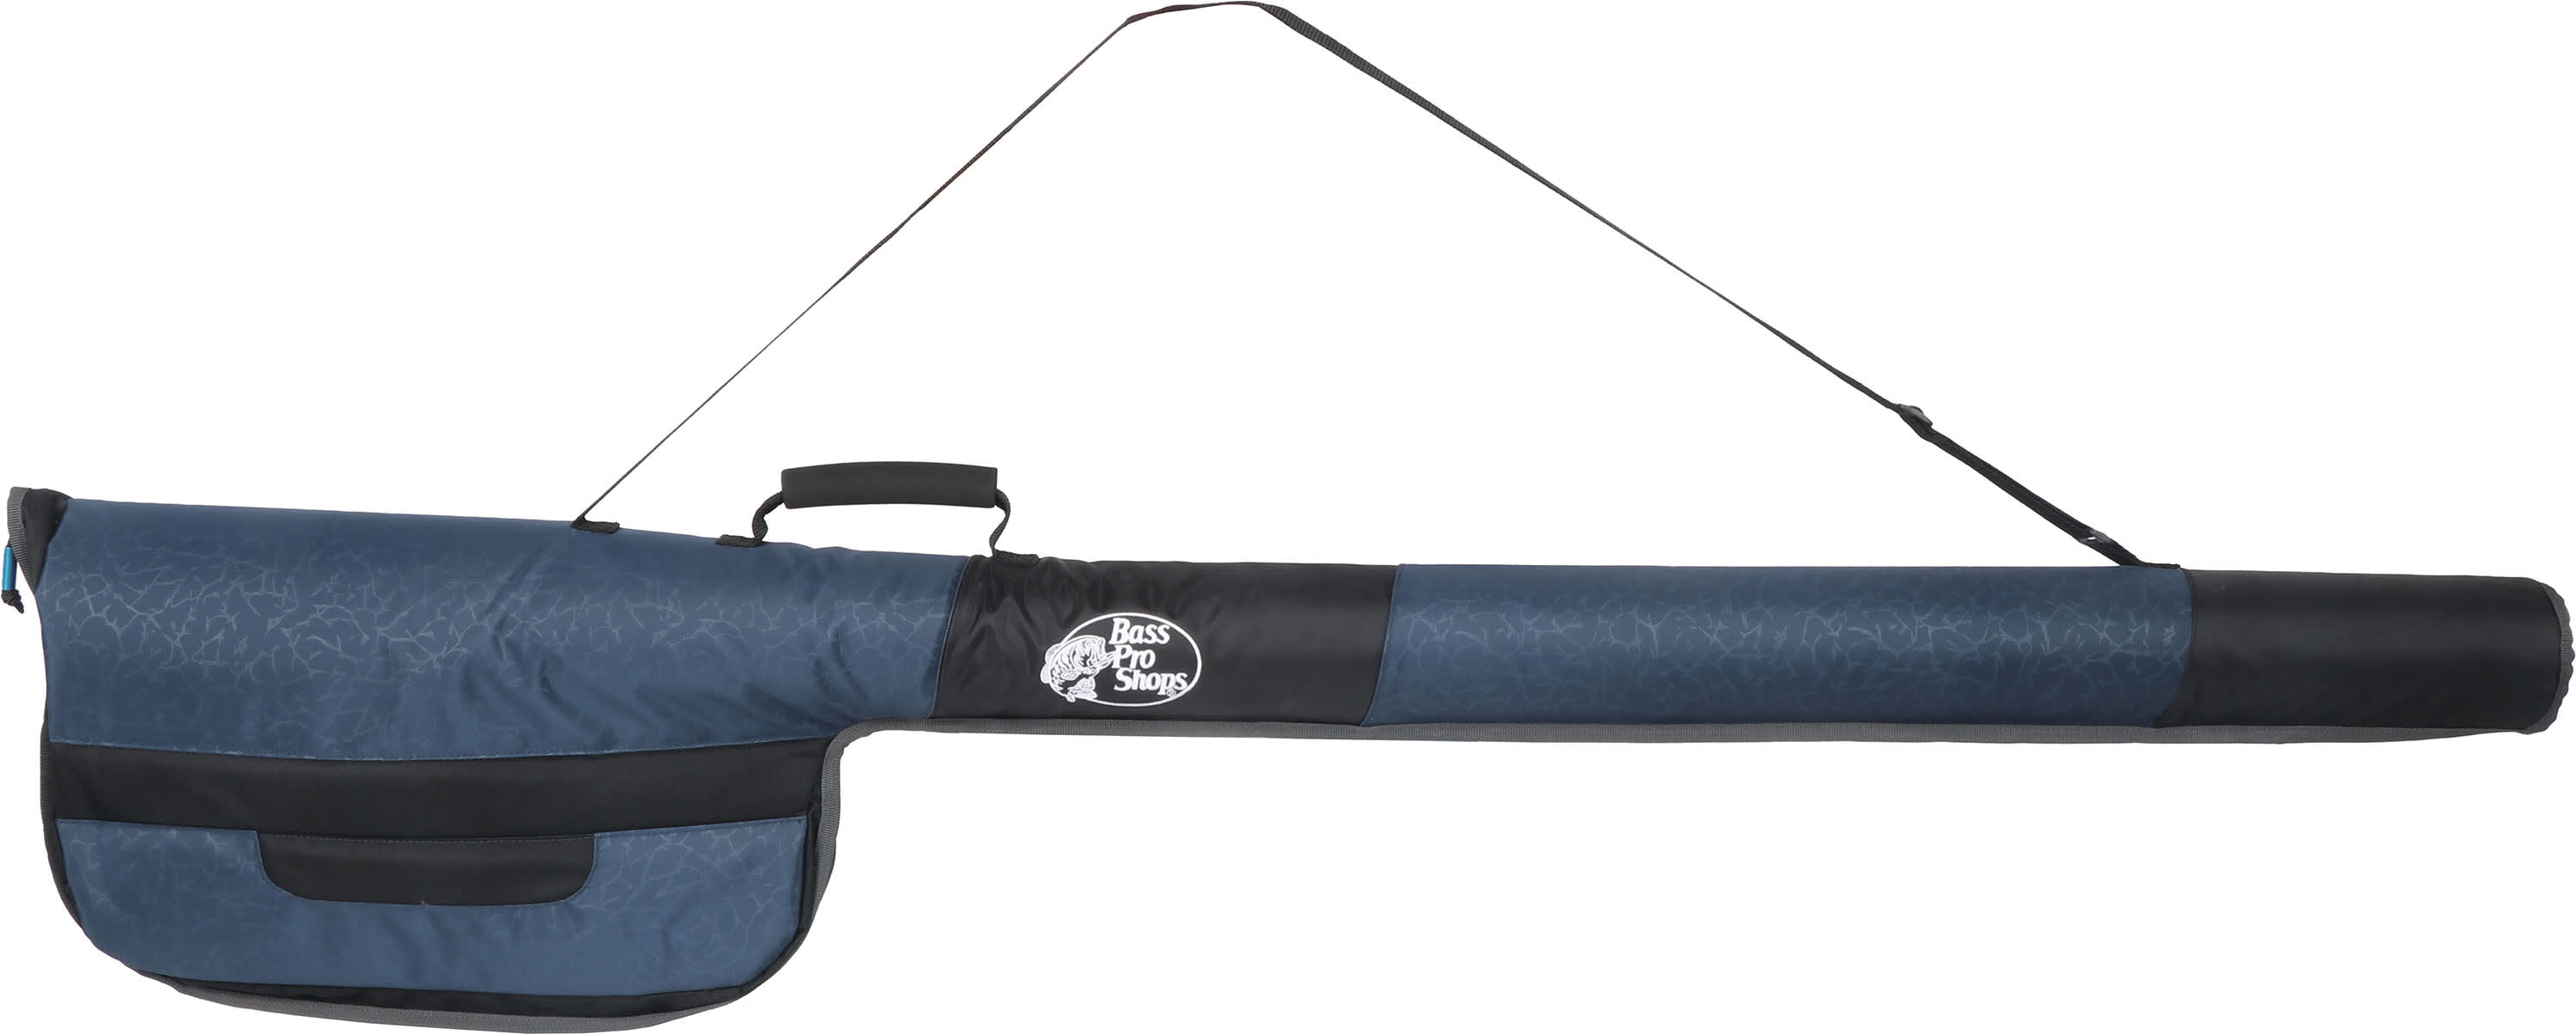 Fishing Rod Cases: Best Travel Fishing Rod Protective Tubes